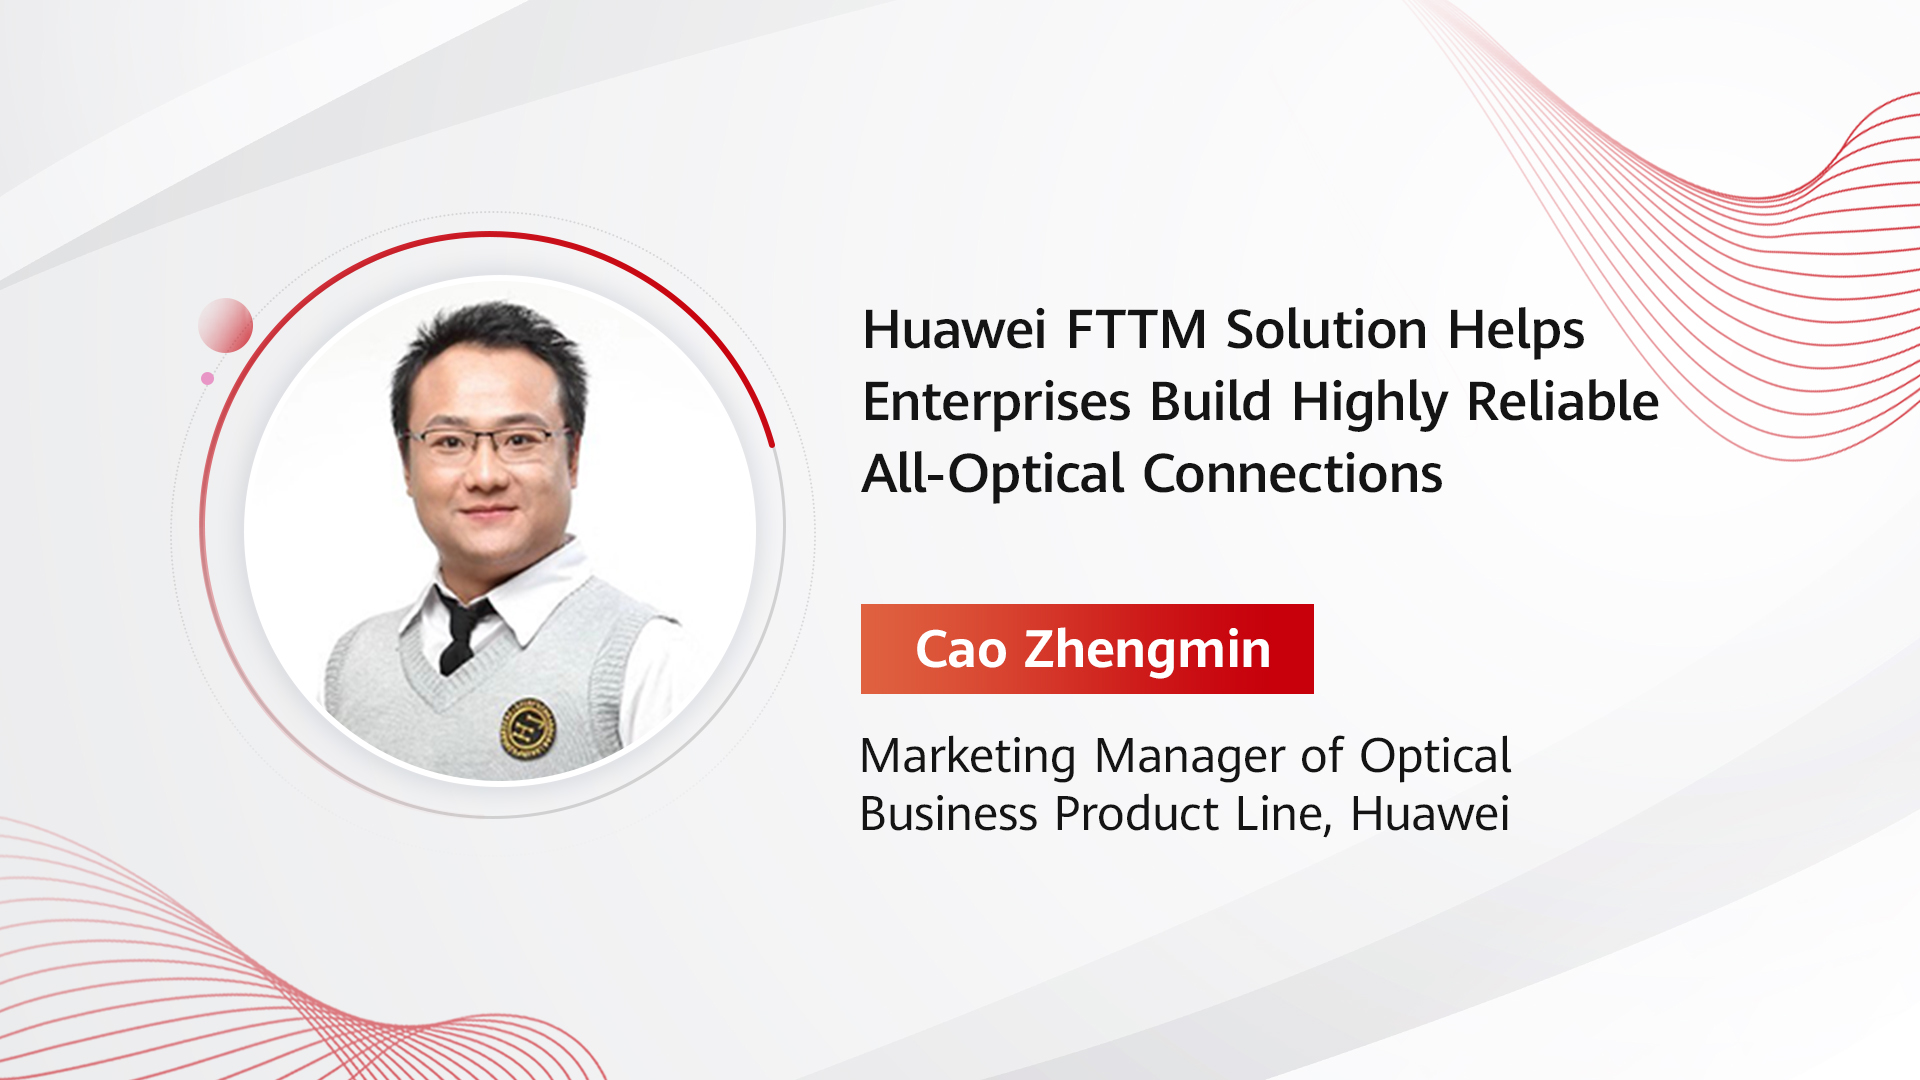 Huawei FTTM Solution Helps Enterprises Build Highly Reliable All-Optical Connections